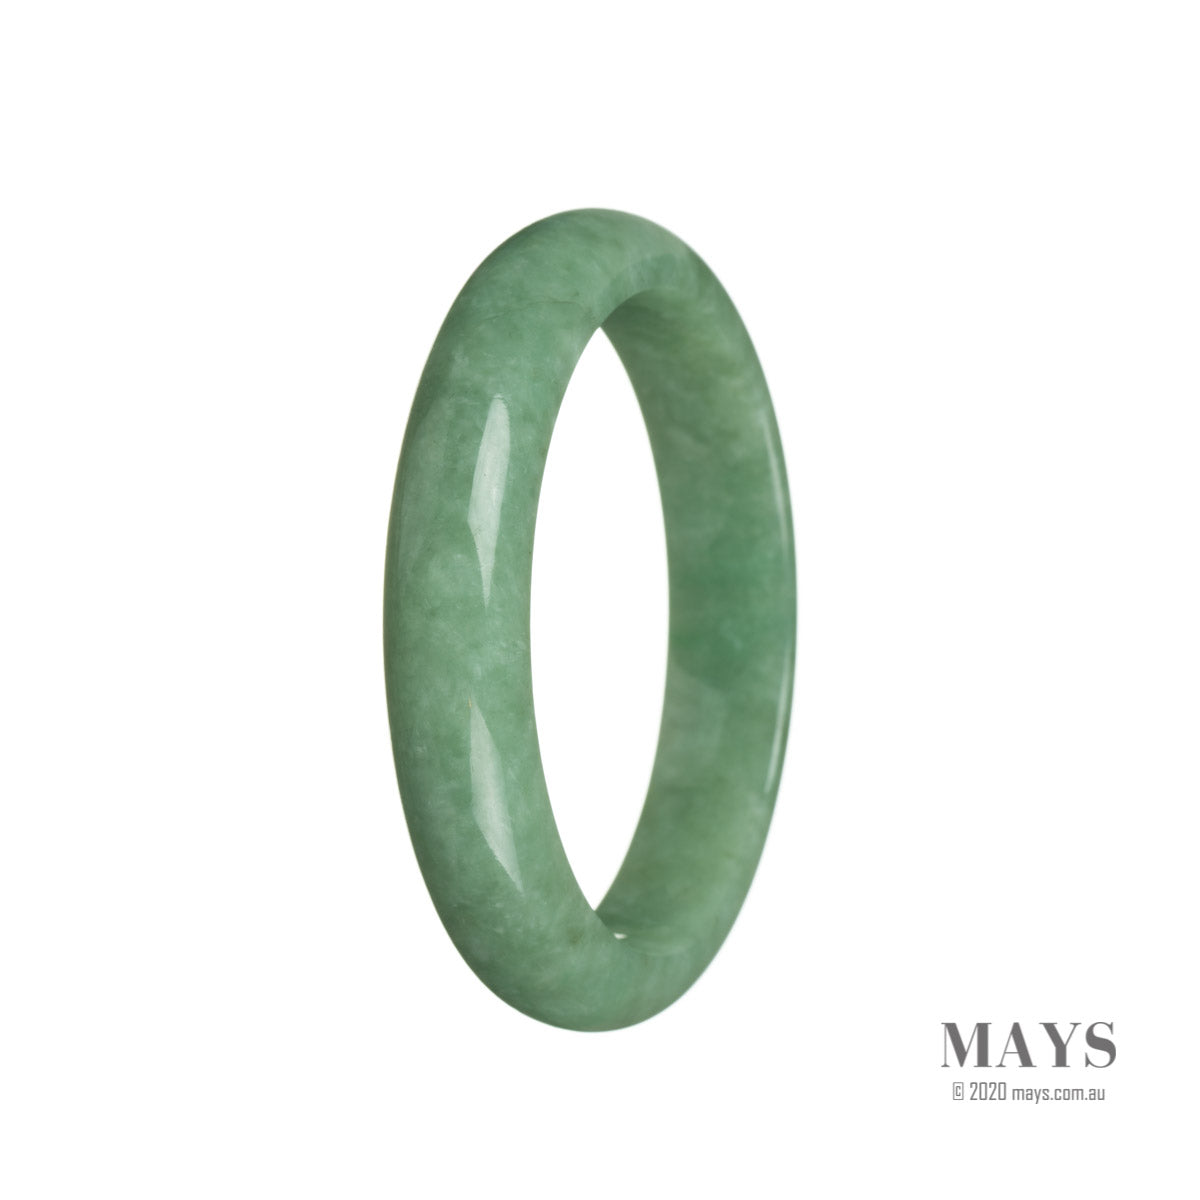 A close-up photo of a traditional green jade bangle with a half-moon shape, measuring 58mm in size. This bangle is certified as Type A jade and is available from the brand MAYS.